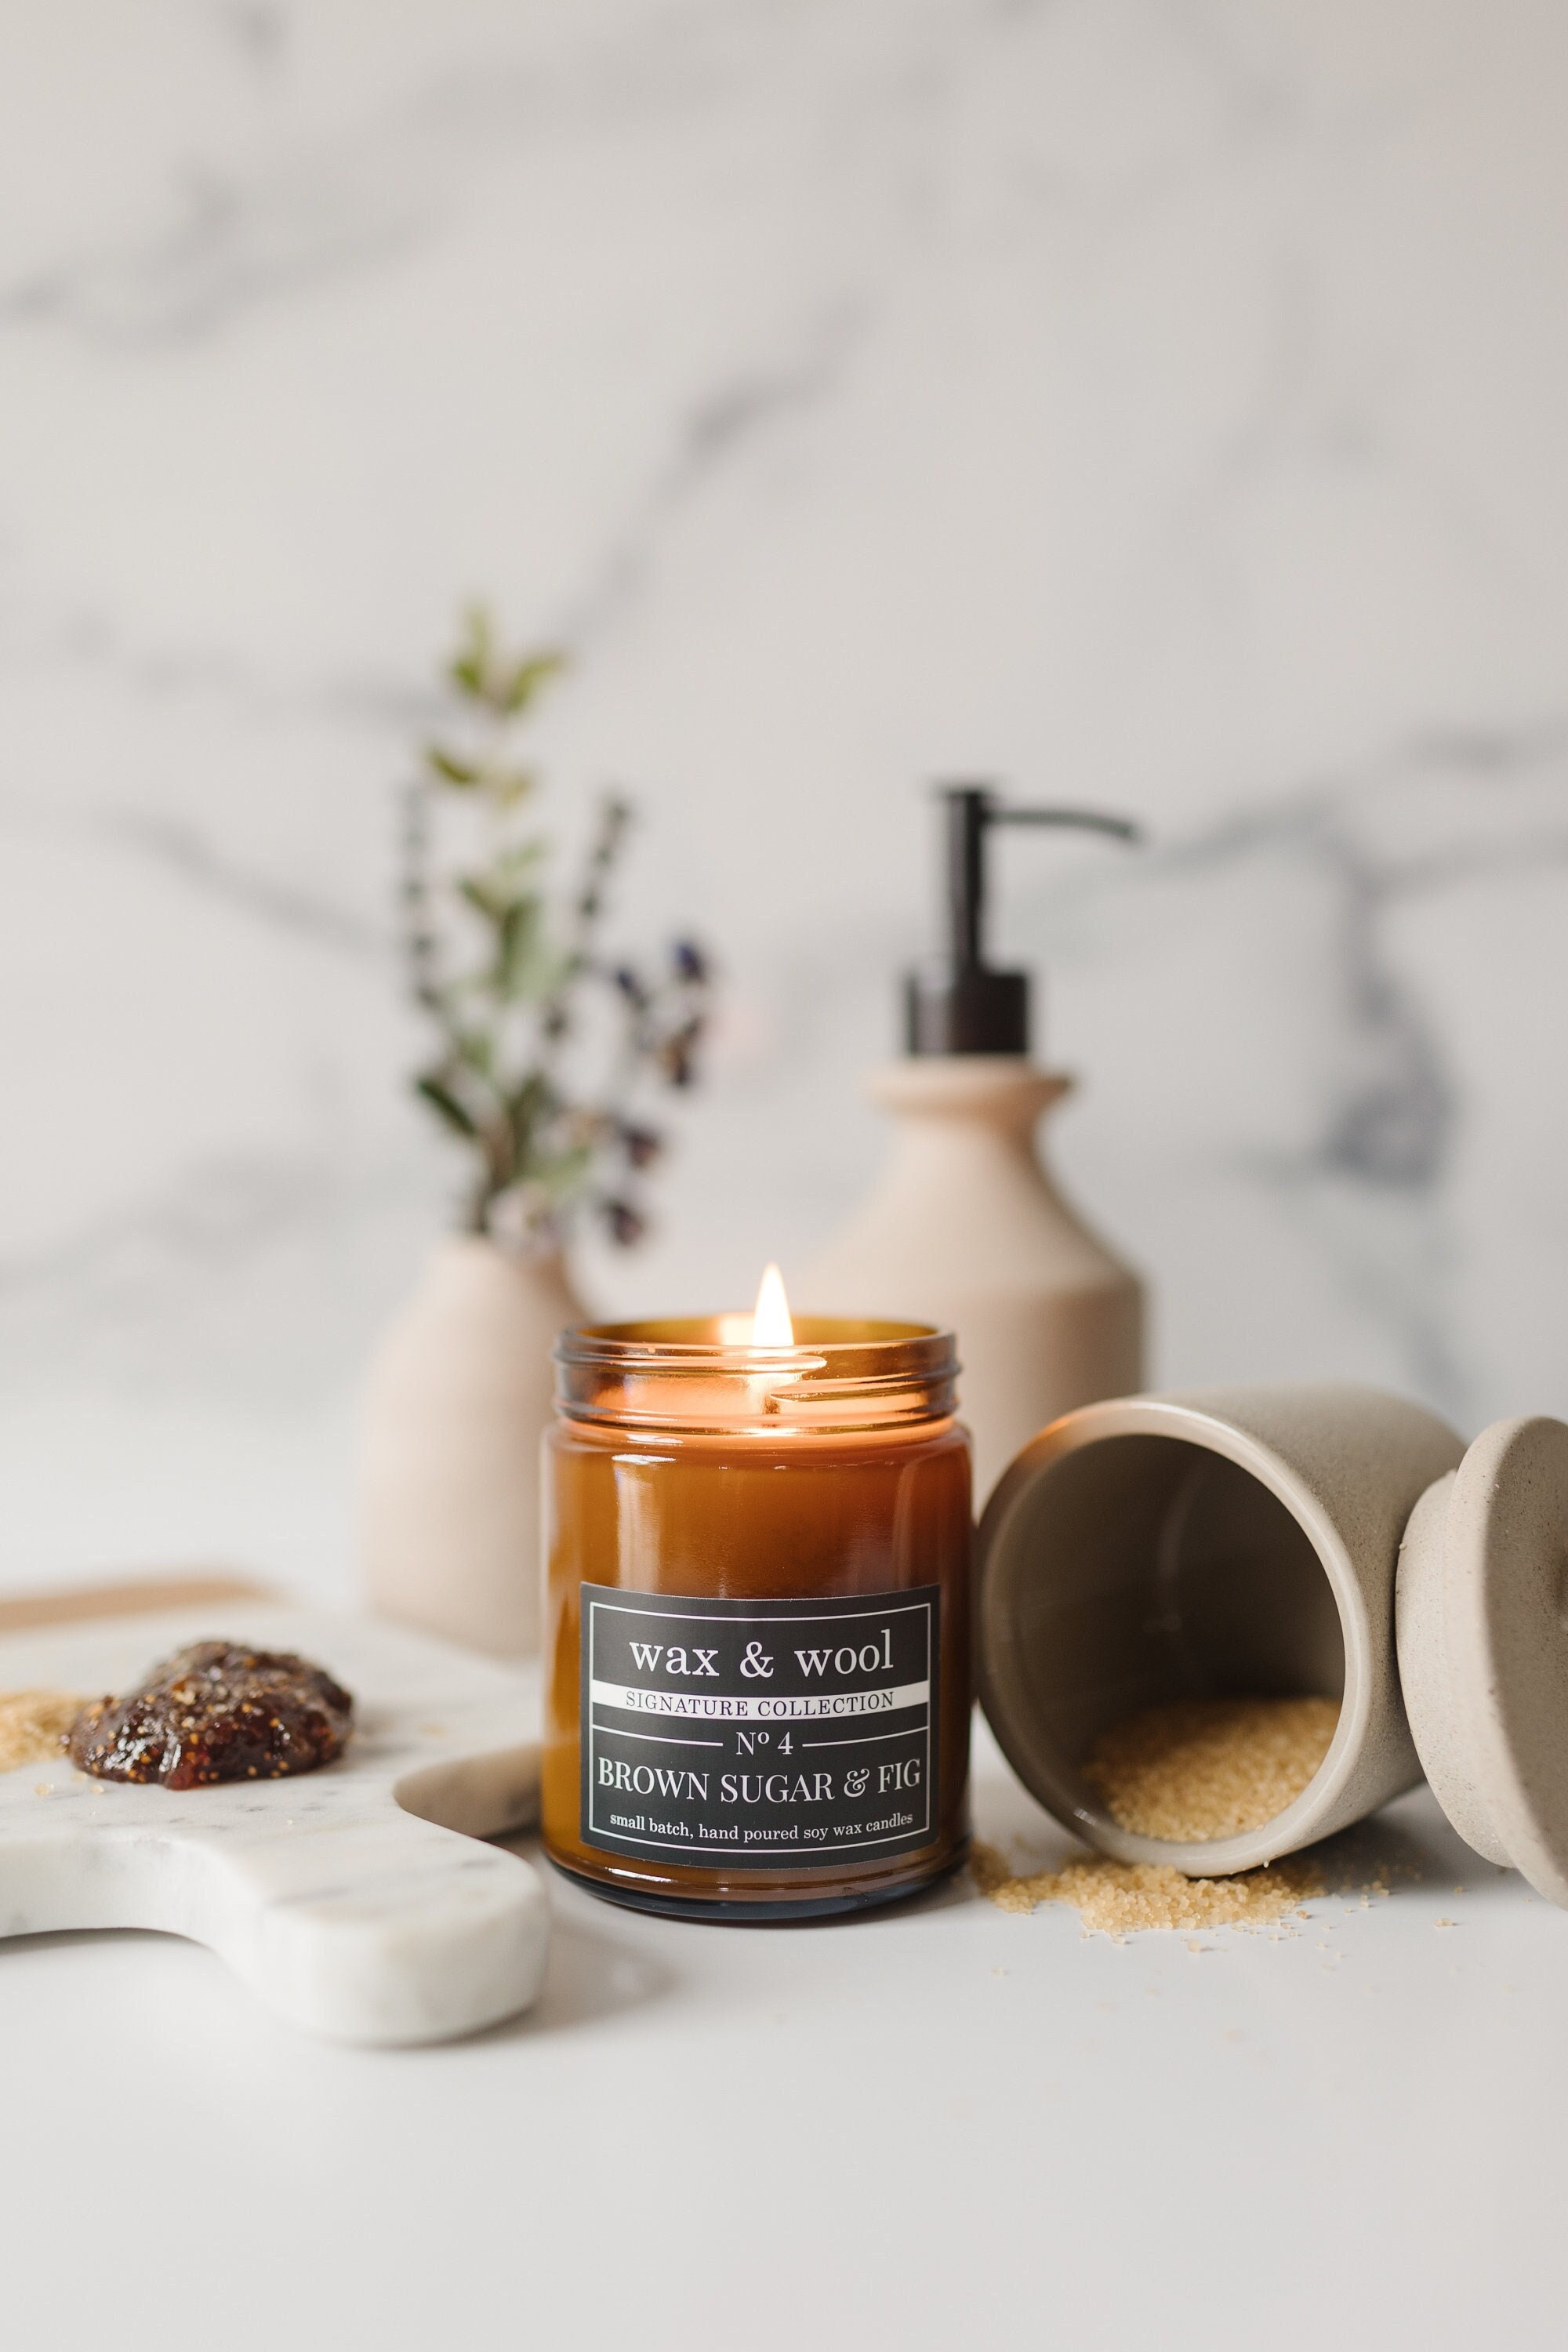 Wax and Wool Pure Soy Wax Candle Christmas Market - The Websters